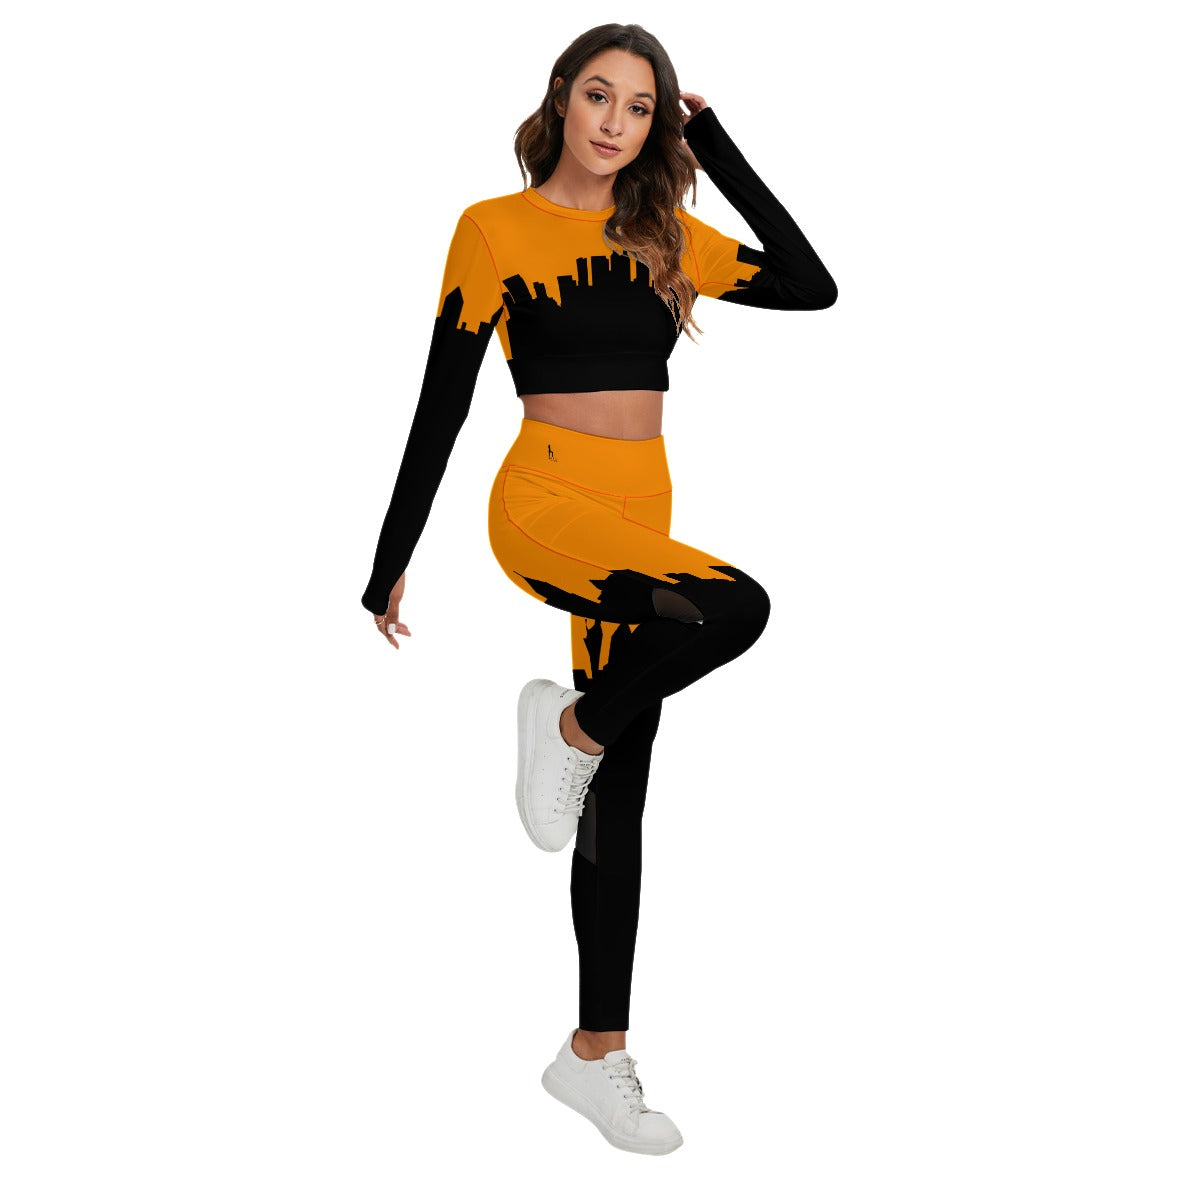 Officially Sexy Neon Orange & Black Skyline Women's Sport Set With Backless Top And Leggings